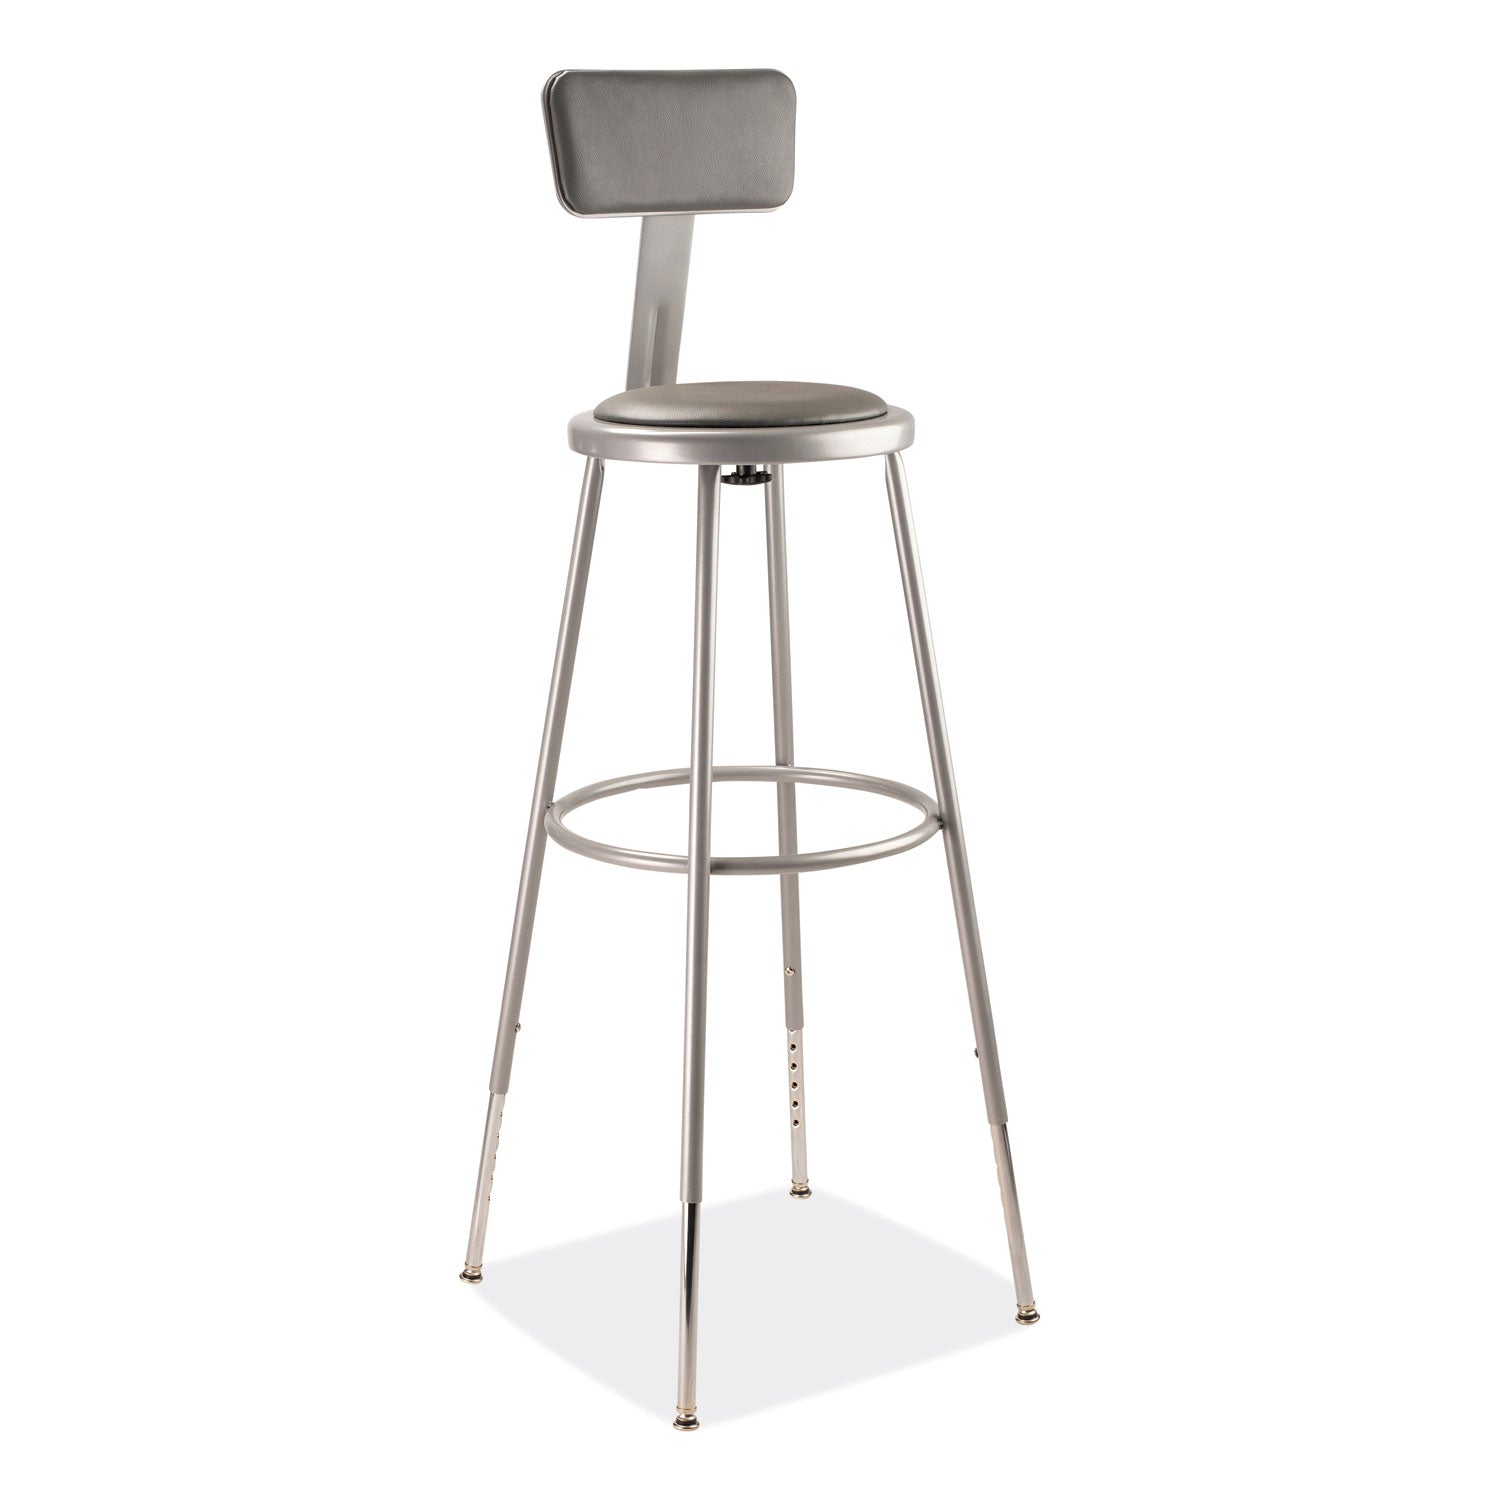 6400-series-height-adjustable-heavy-duty-padded-stool-w-backrest-supports-300lb-32-39-seat-ht-grayships-in-1-3-bus-days_nps6430hb - 1